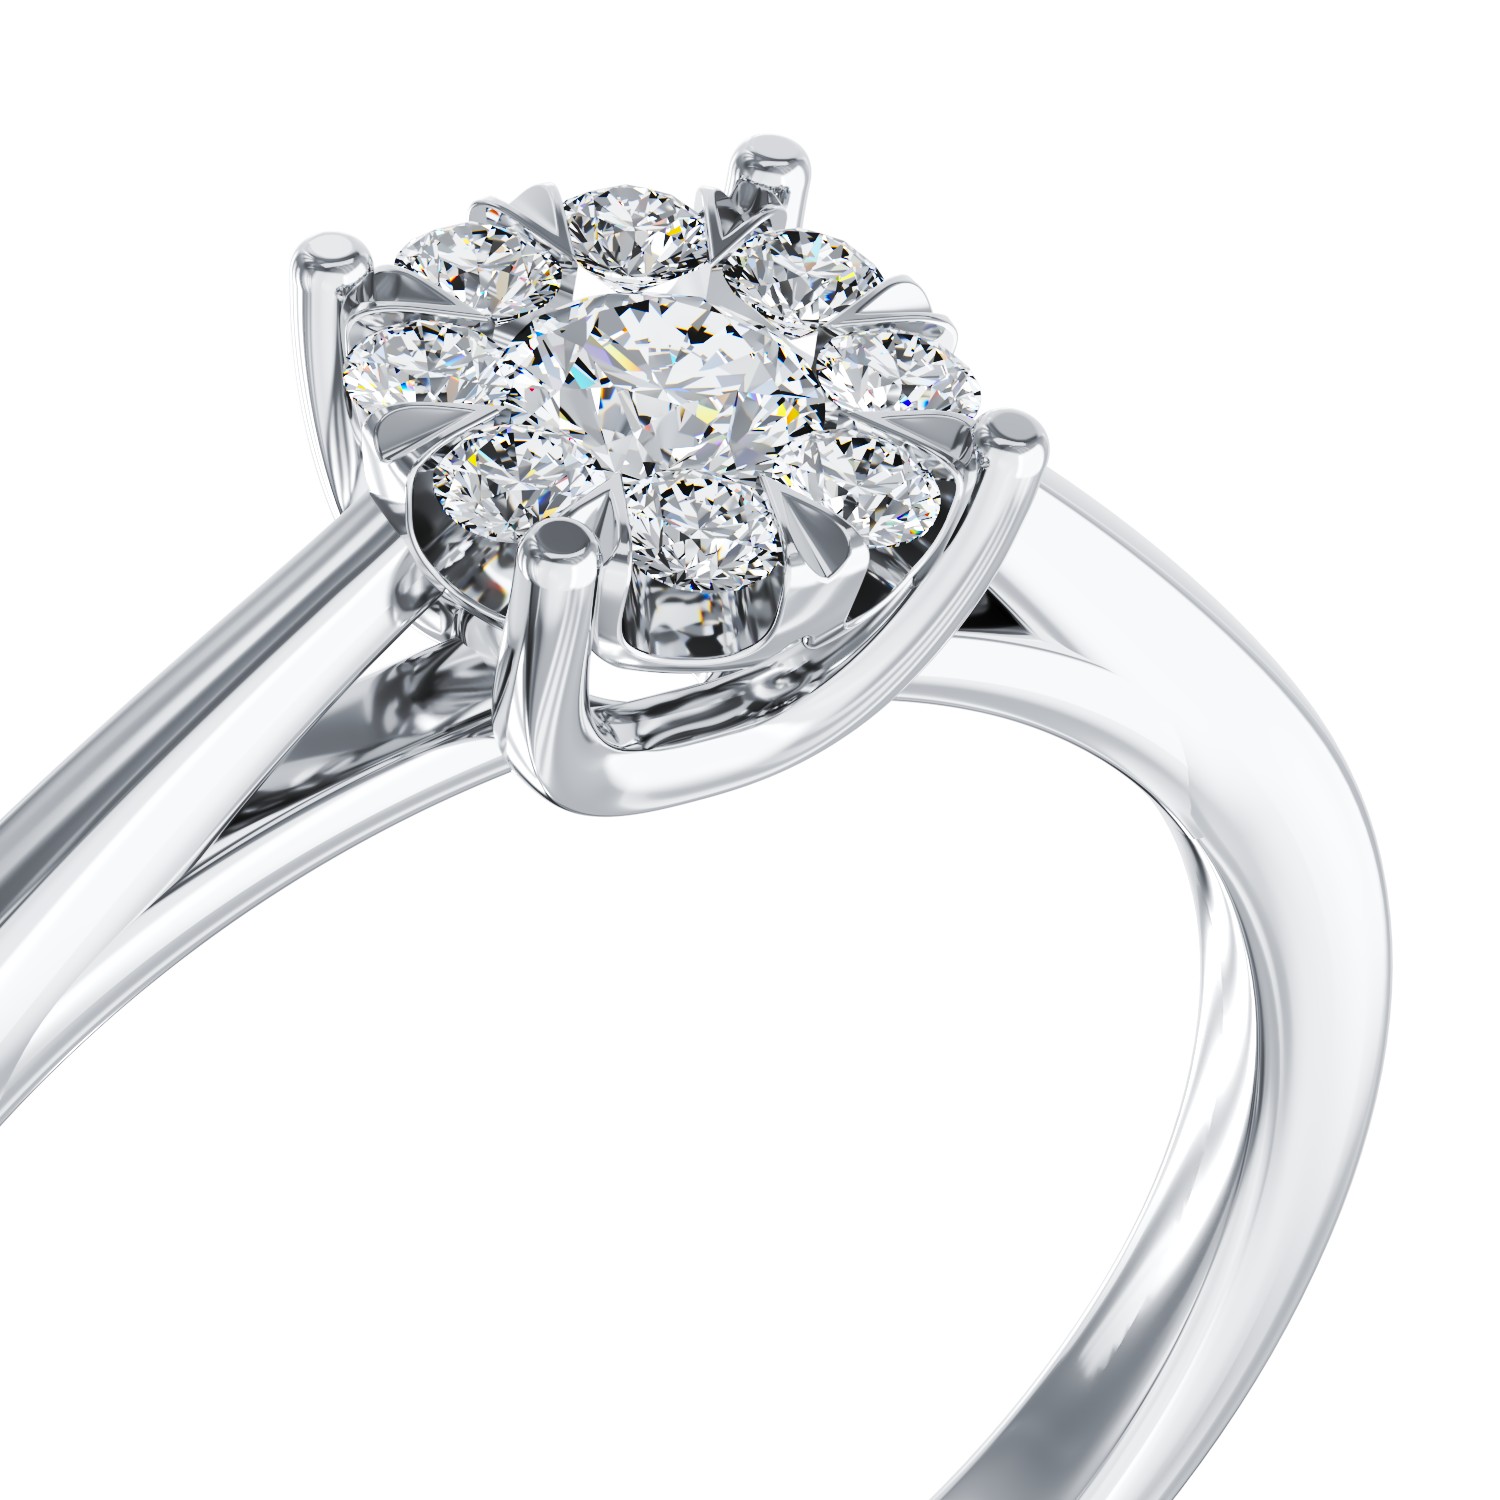 White gold engagement ring with 0.25ct diamonds